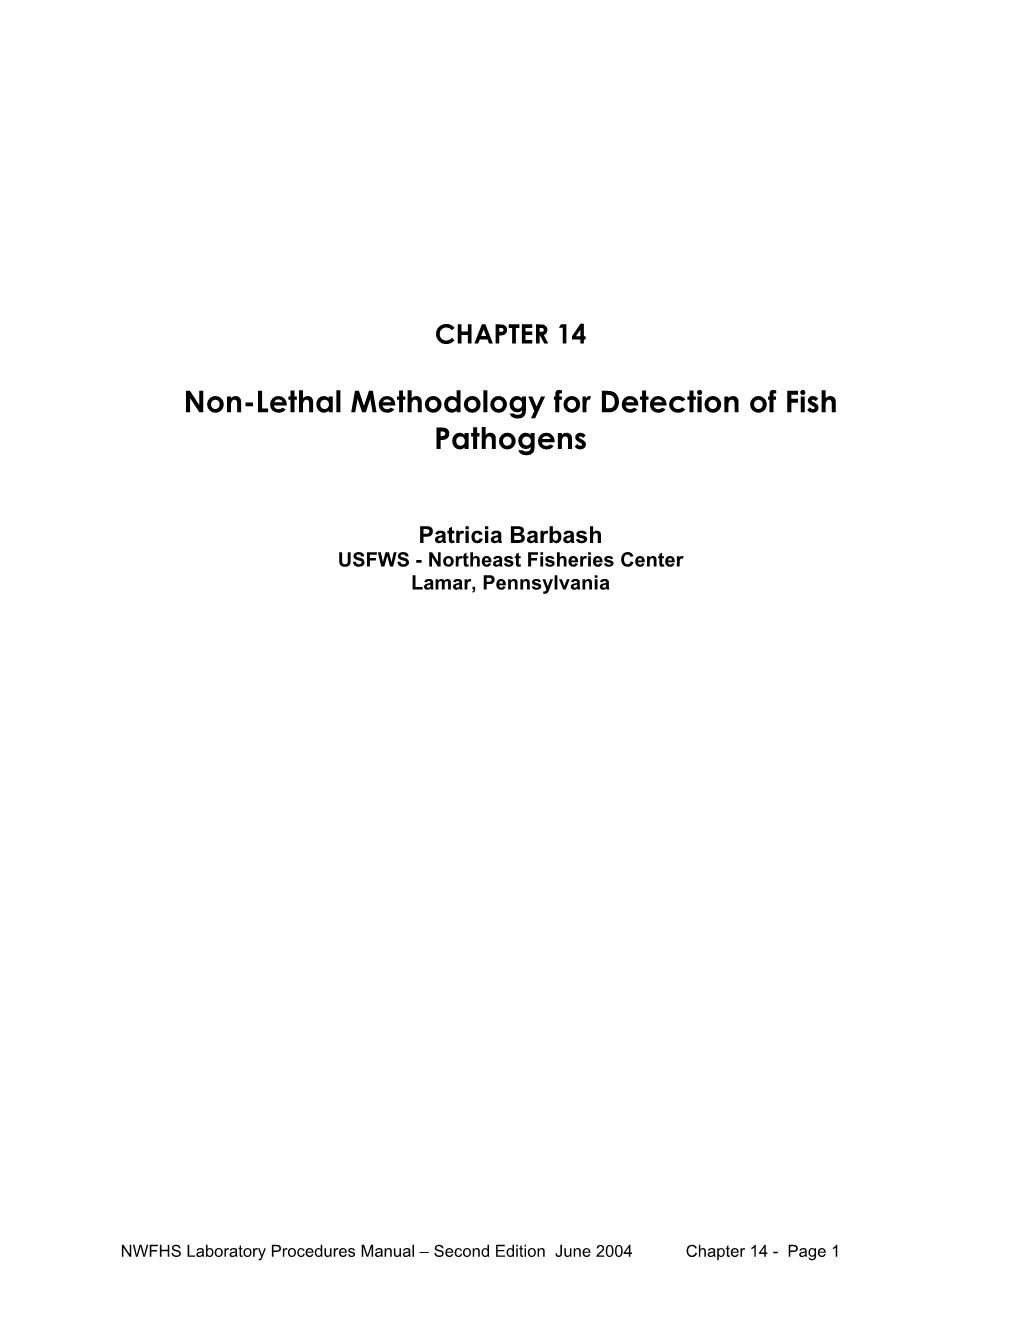 Non-Lethal Methodology for Detection of Fish Pathogens